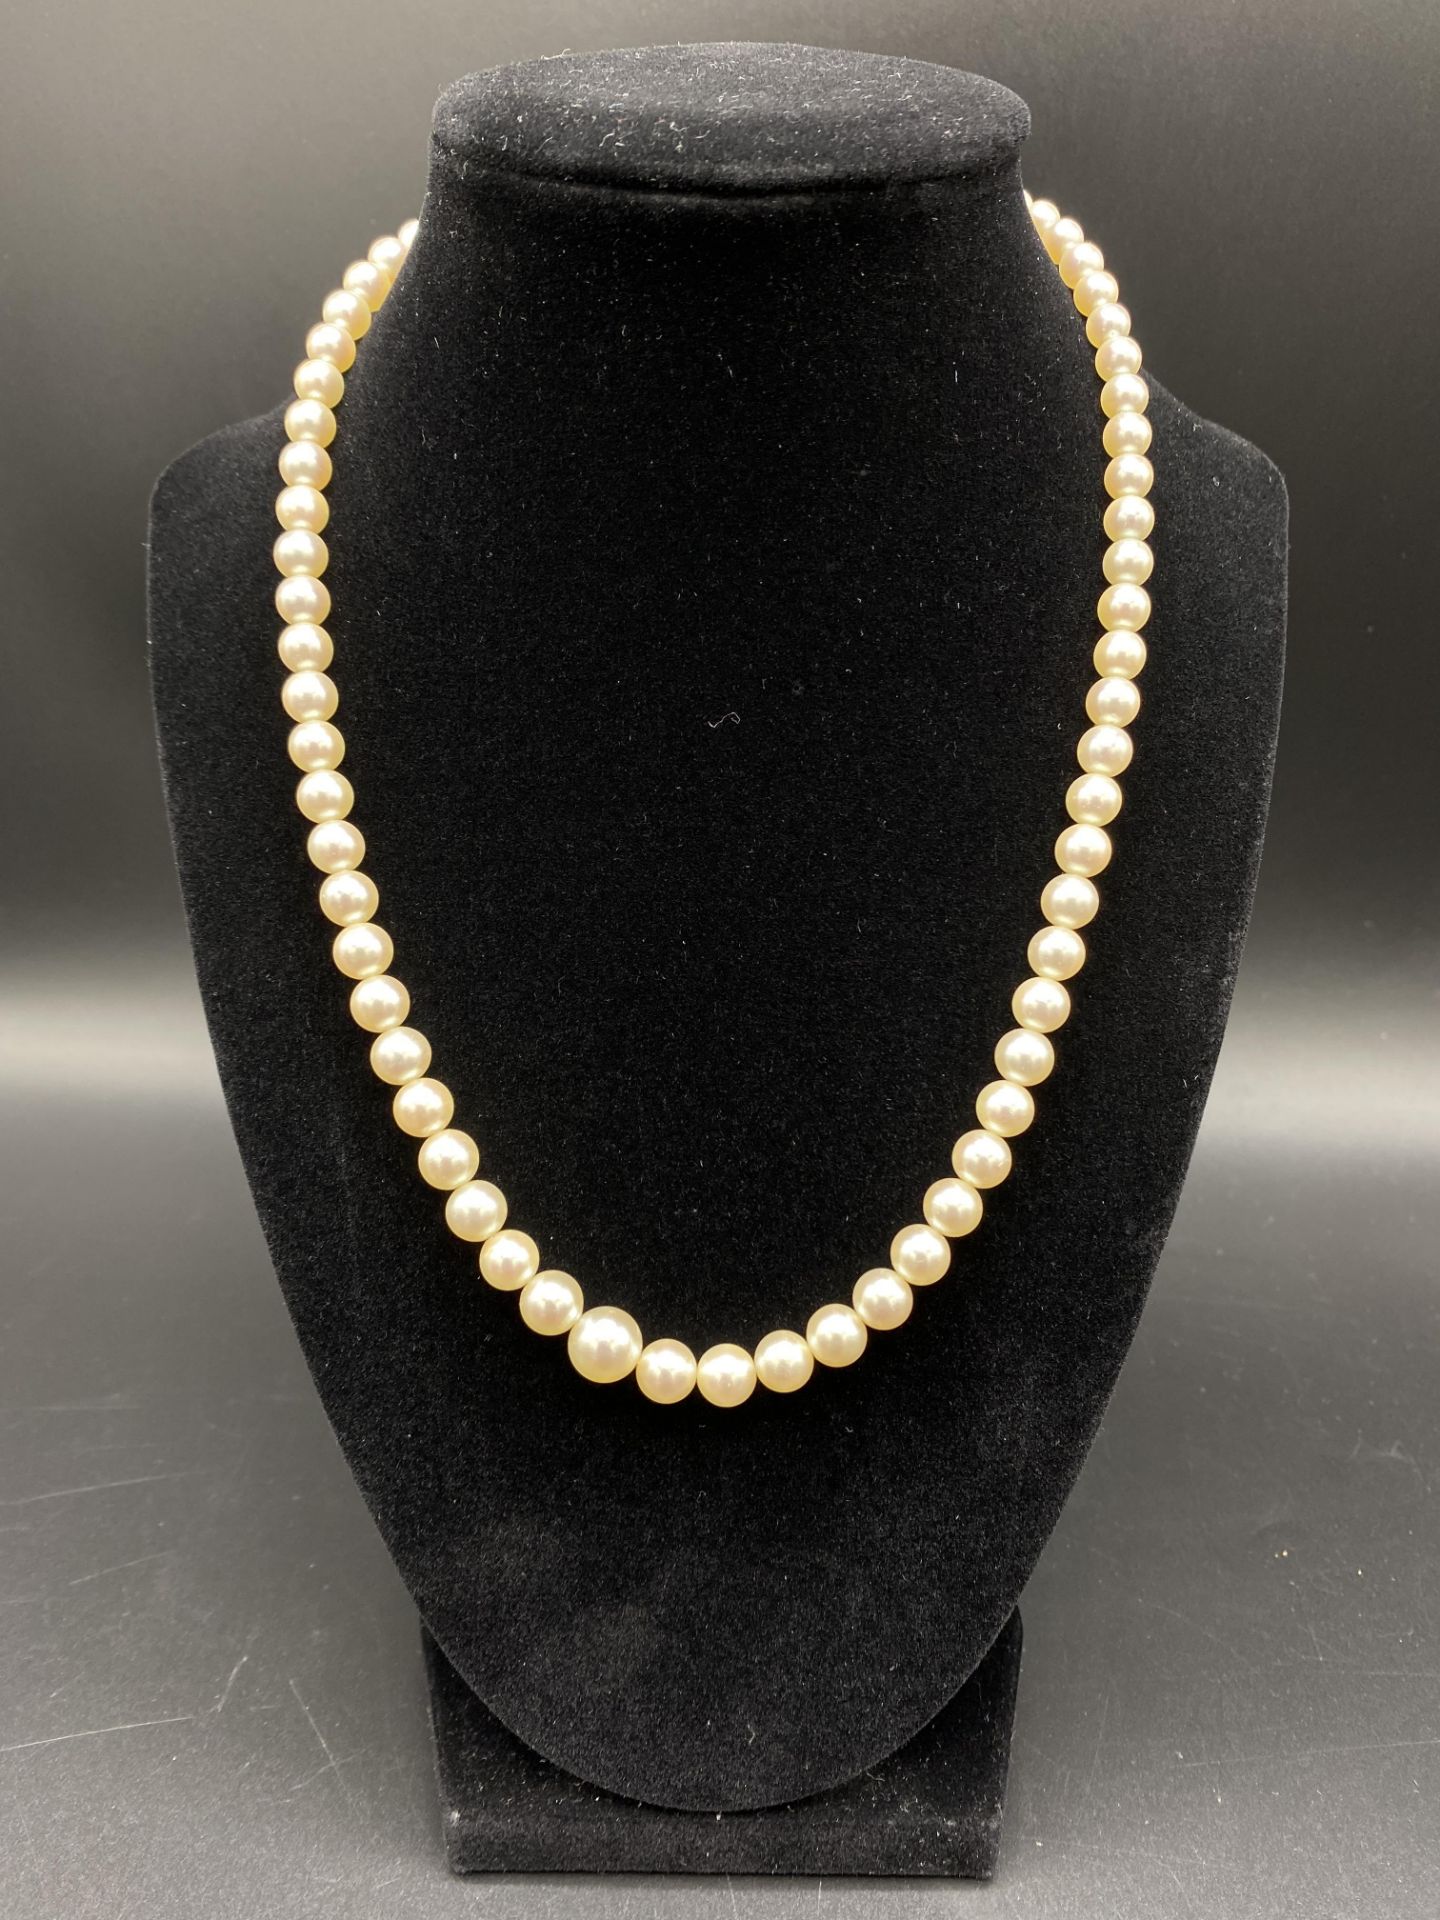 Pearl necklace with matching earrings - Image 2 of 7